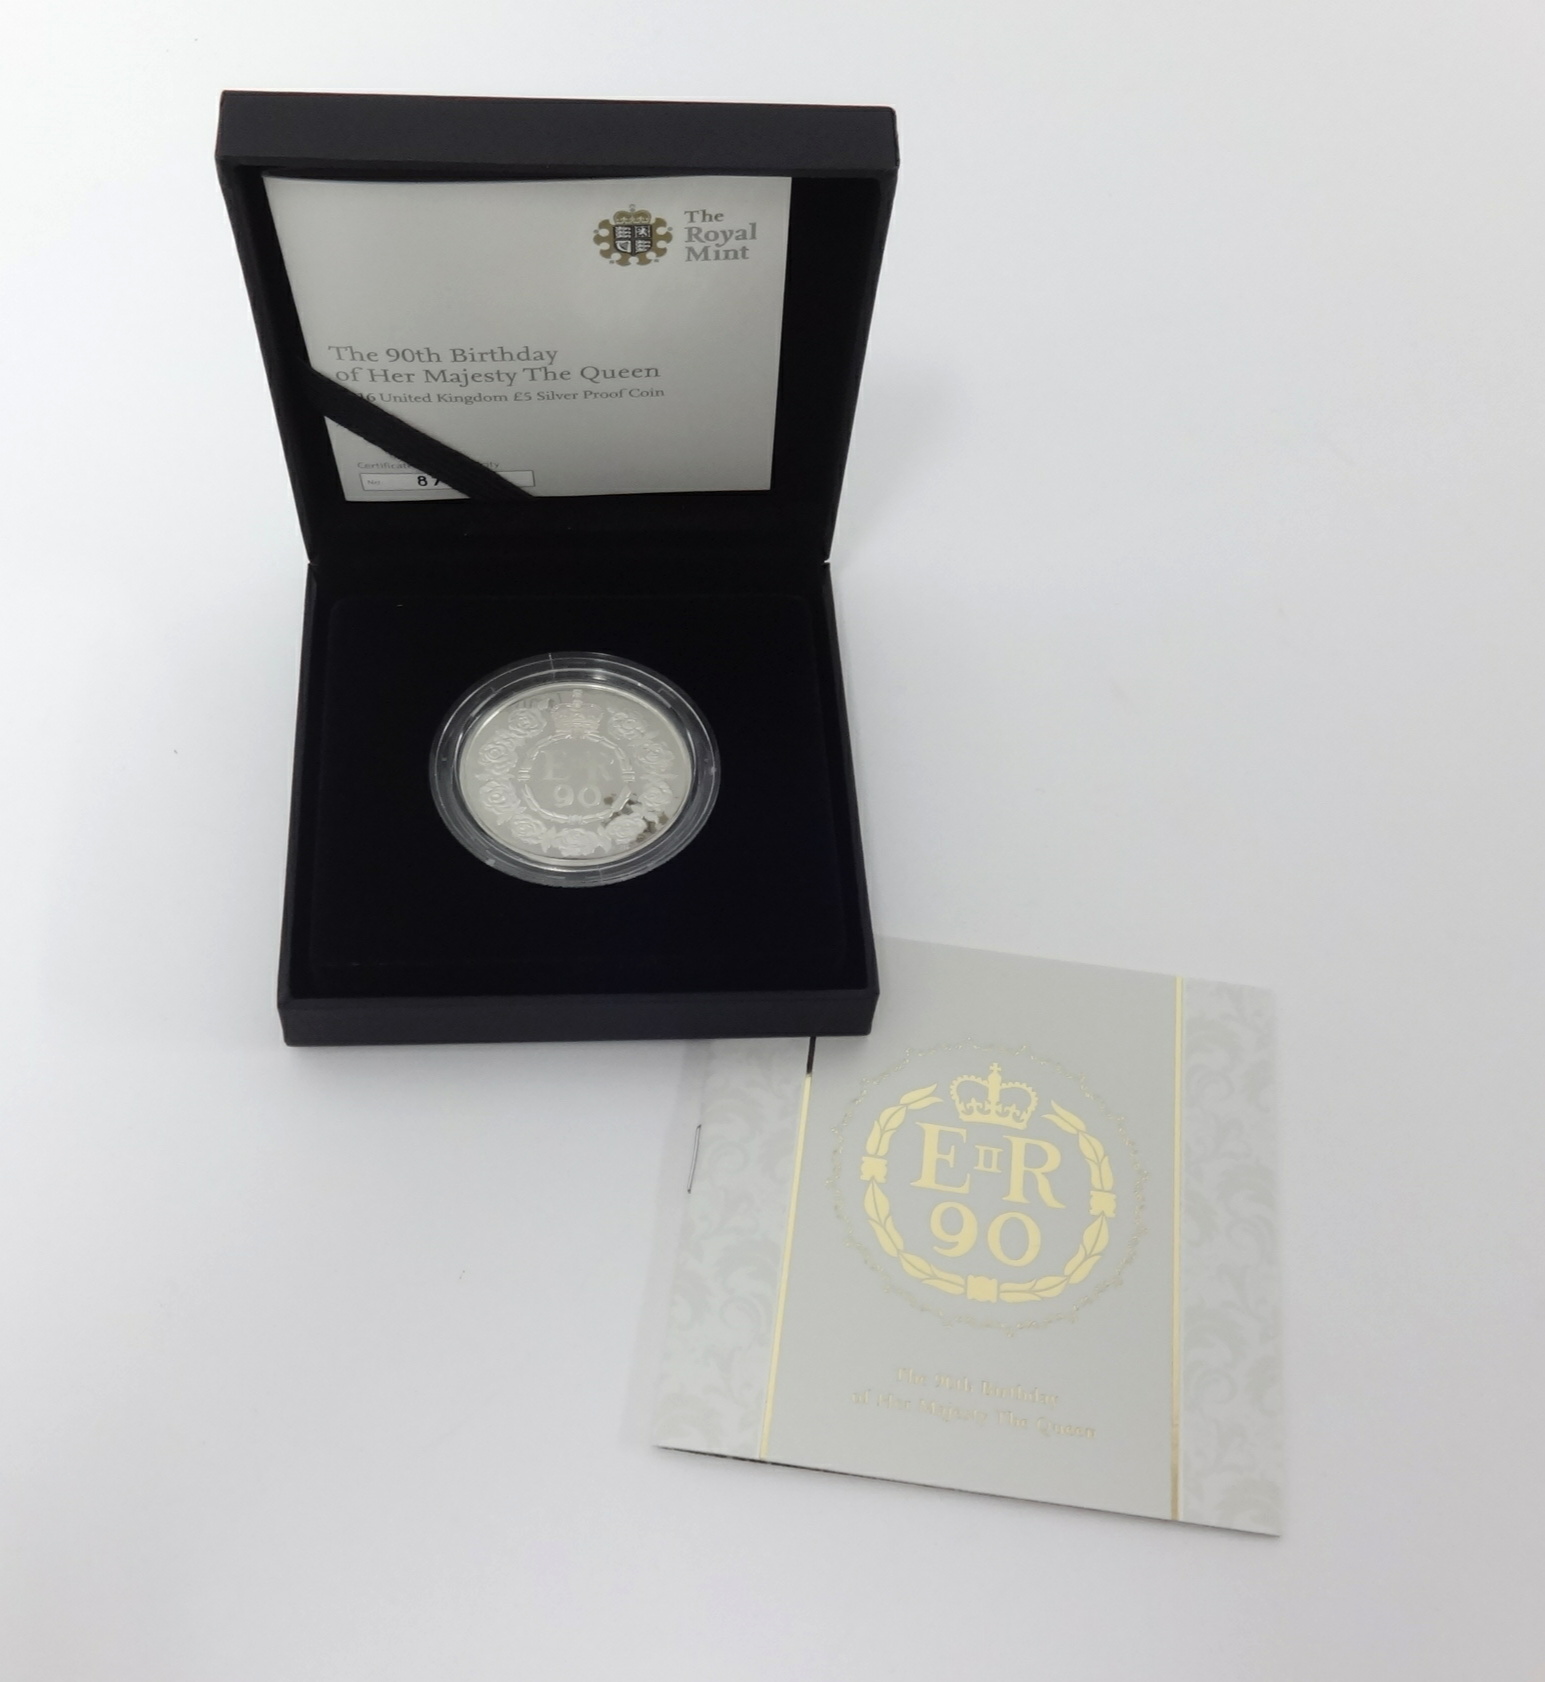 Royal Mint, 90th birthday The Queen 2016 five pound silver proof coin, boxed with certificate.